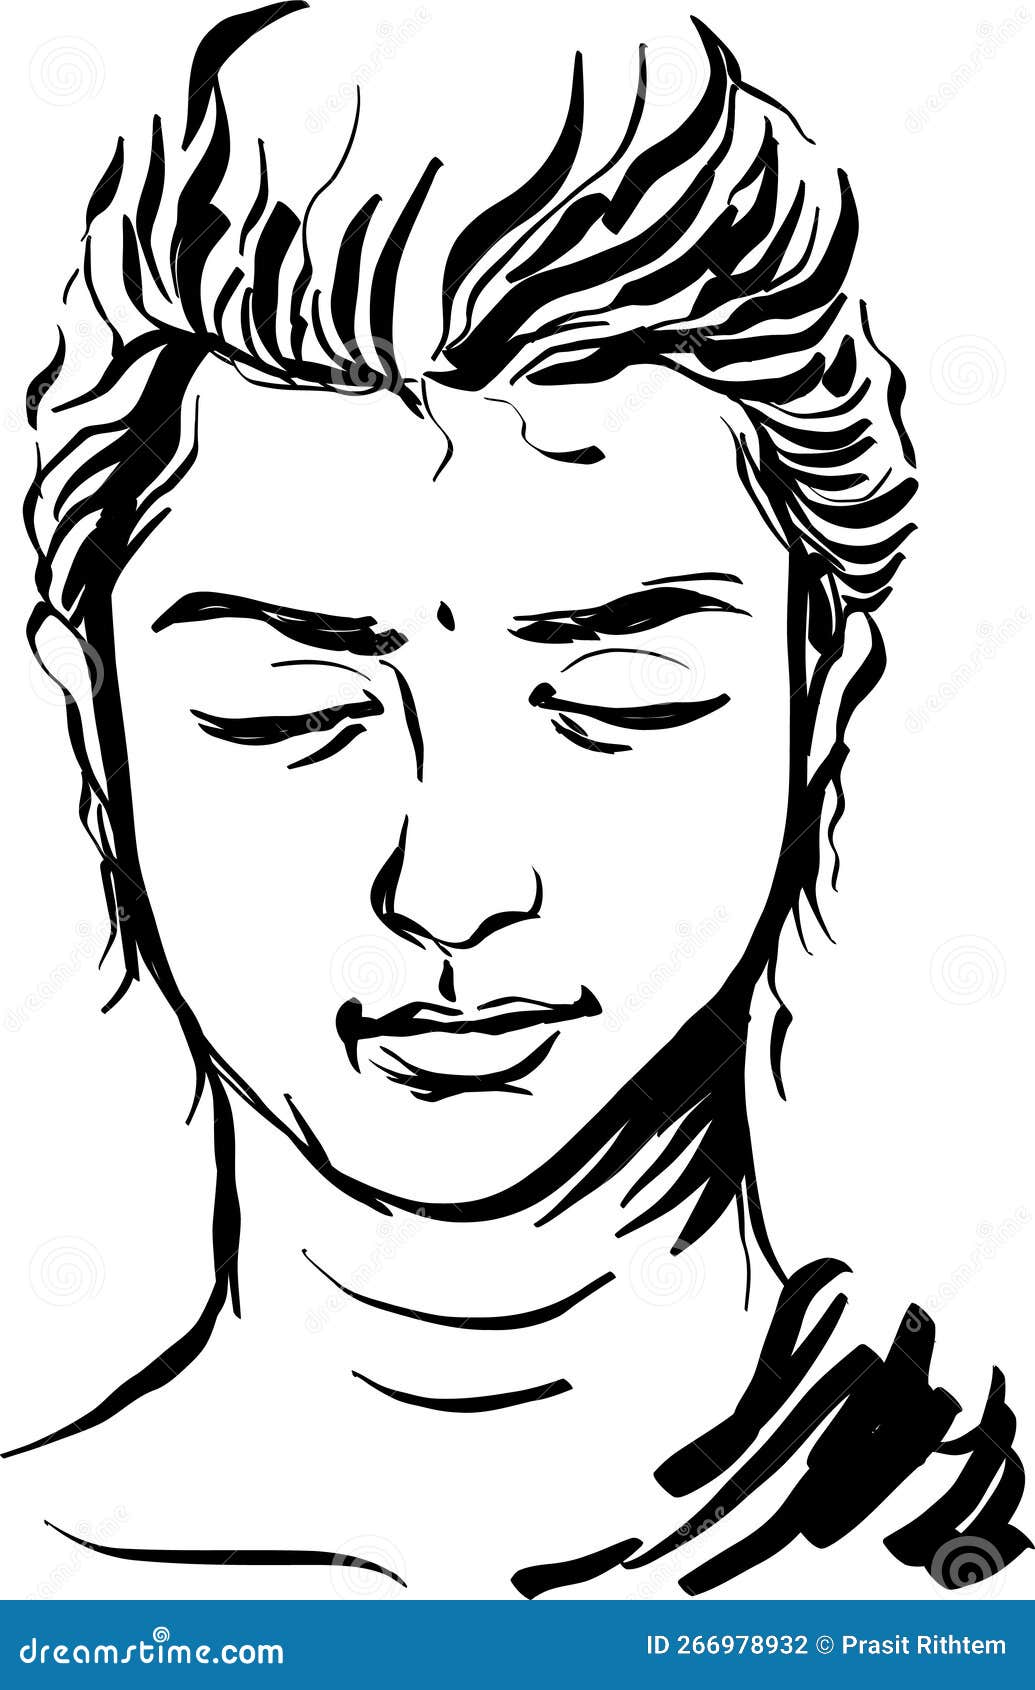 Buddha Doodle stock vector. Illustration of praying, culture - 43561574